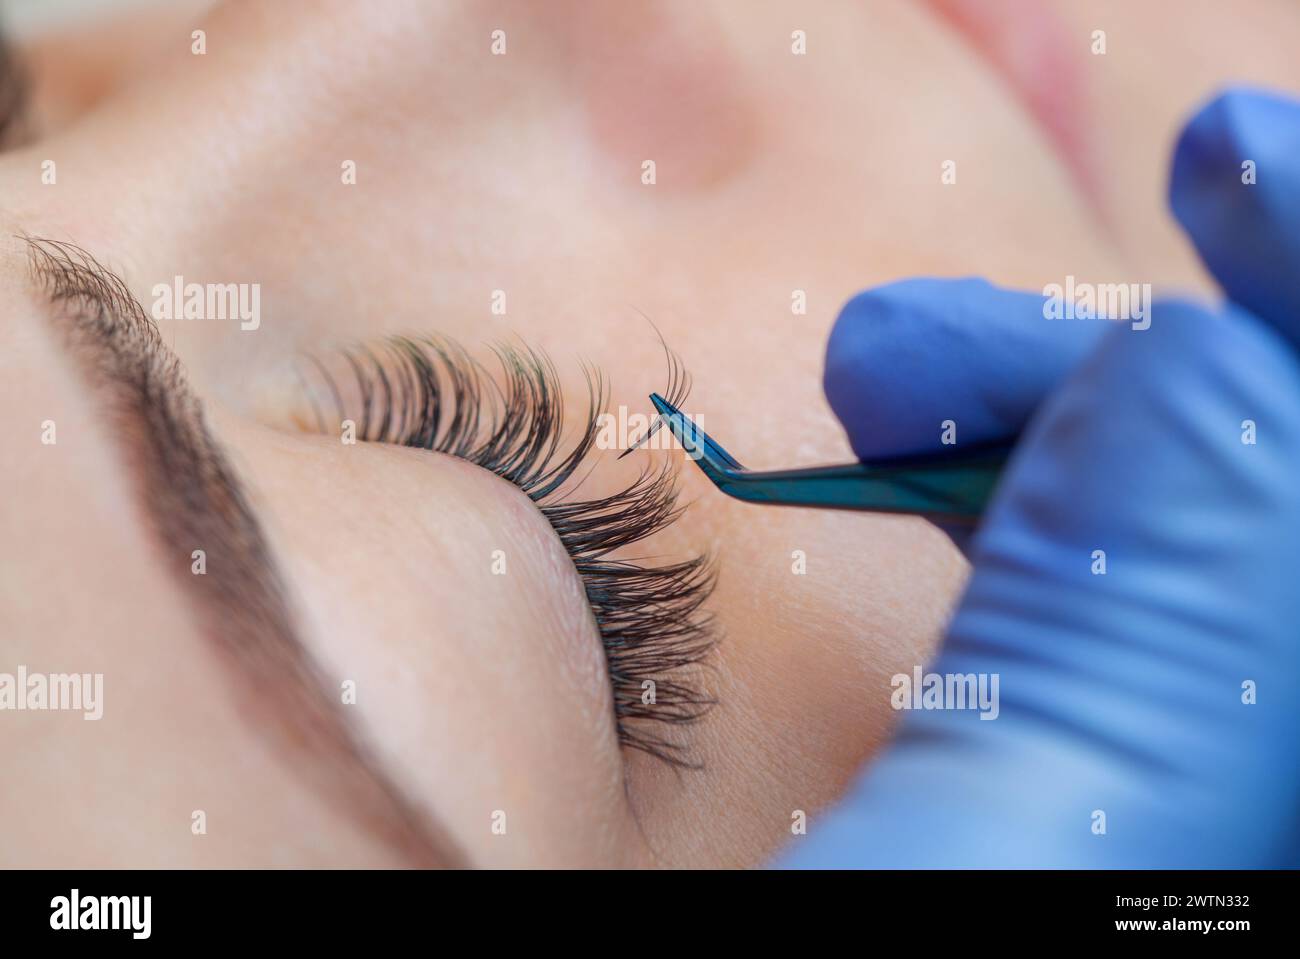 Beautiful Woman with long eyelashes in a beauty salon. Eyelash extension procedure. Lashes close up Stock Photo